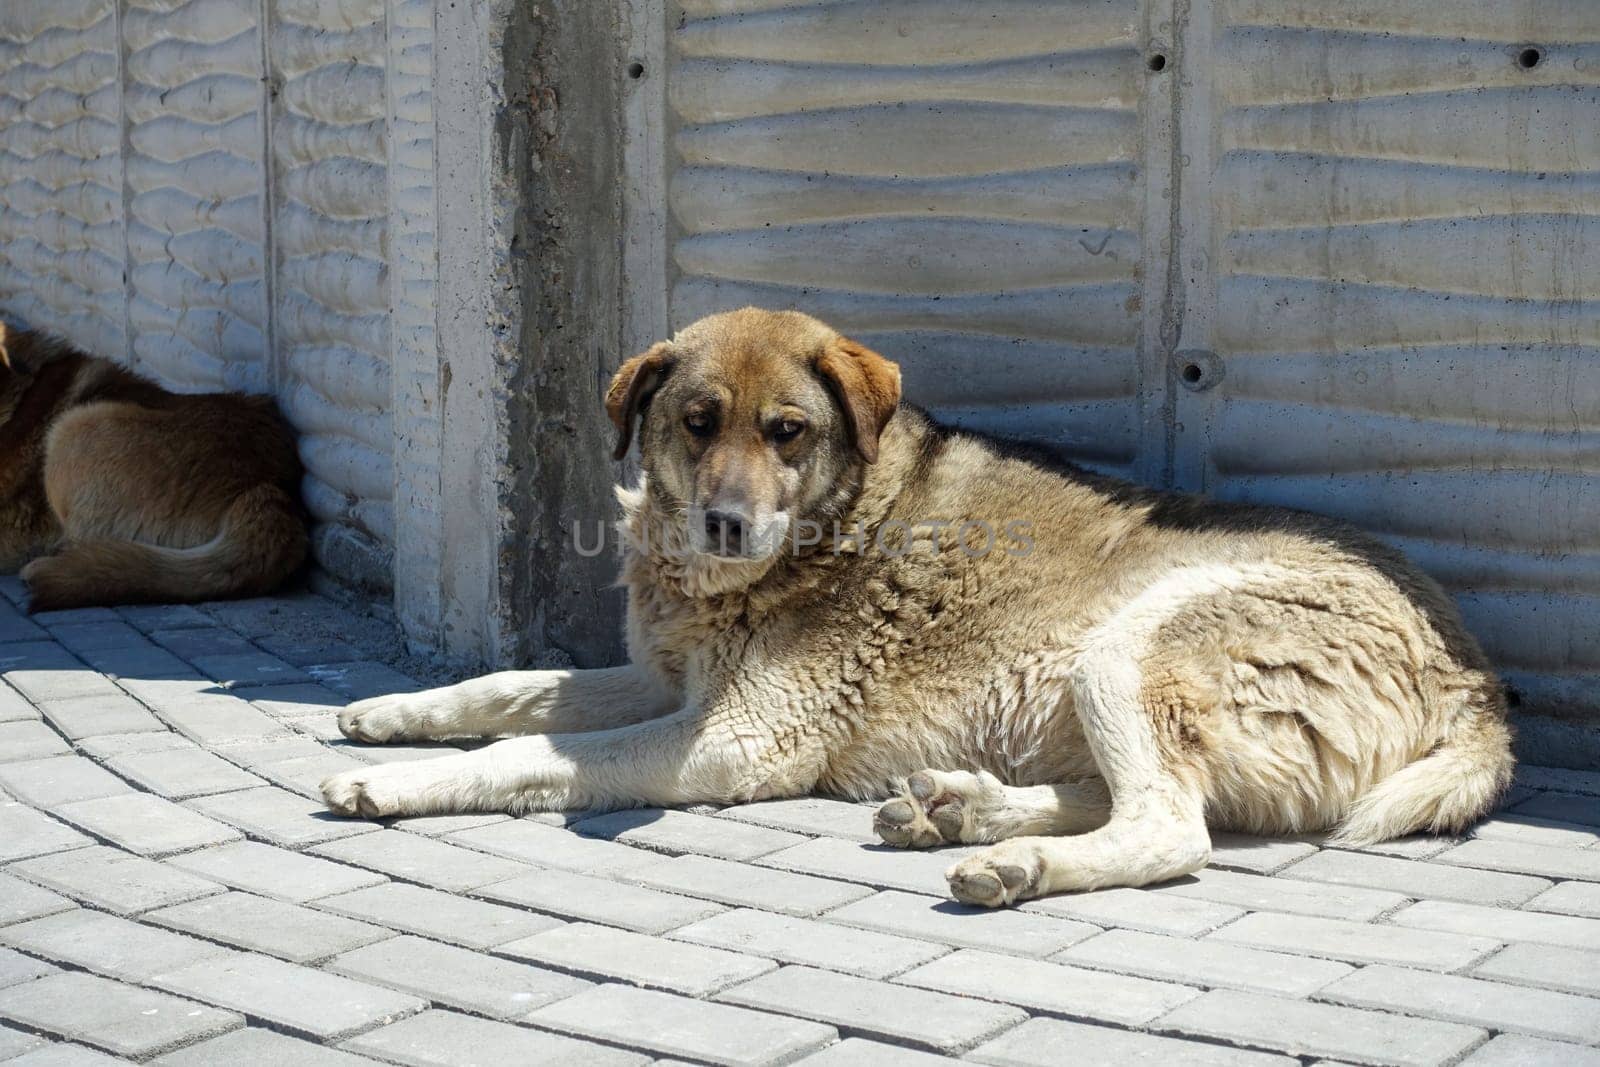 stray dogs lying on street pavements, tired dog breathing fast,